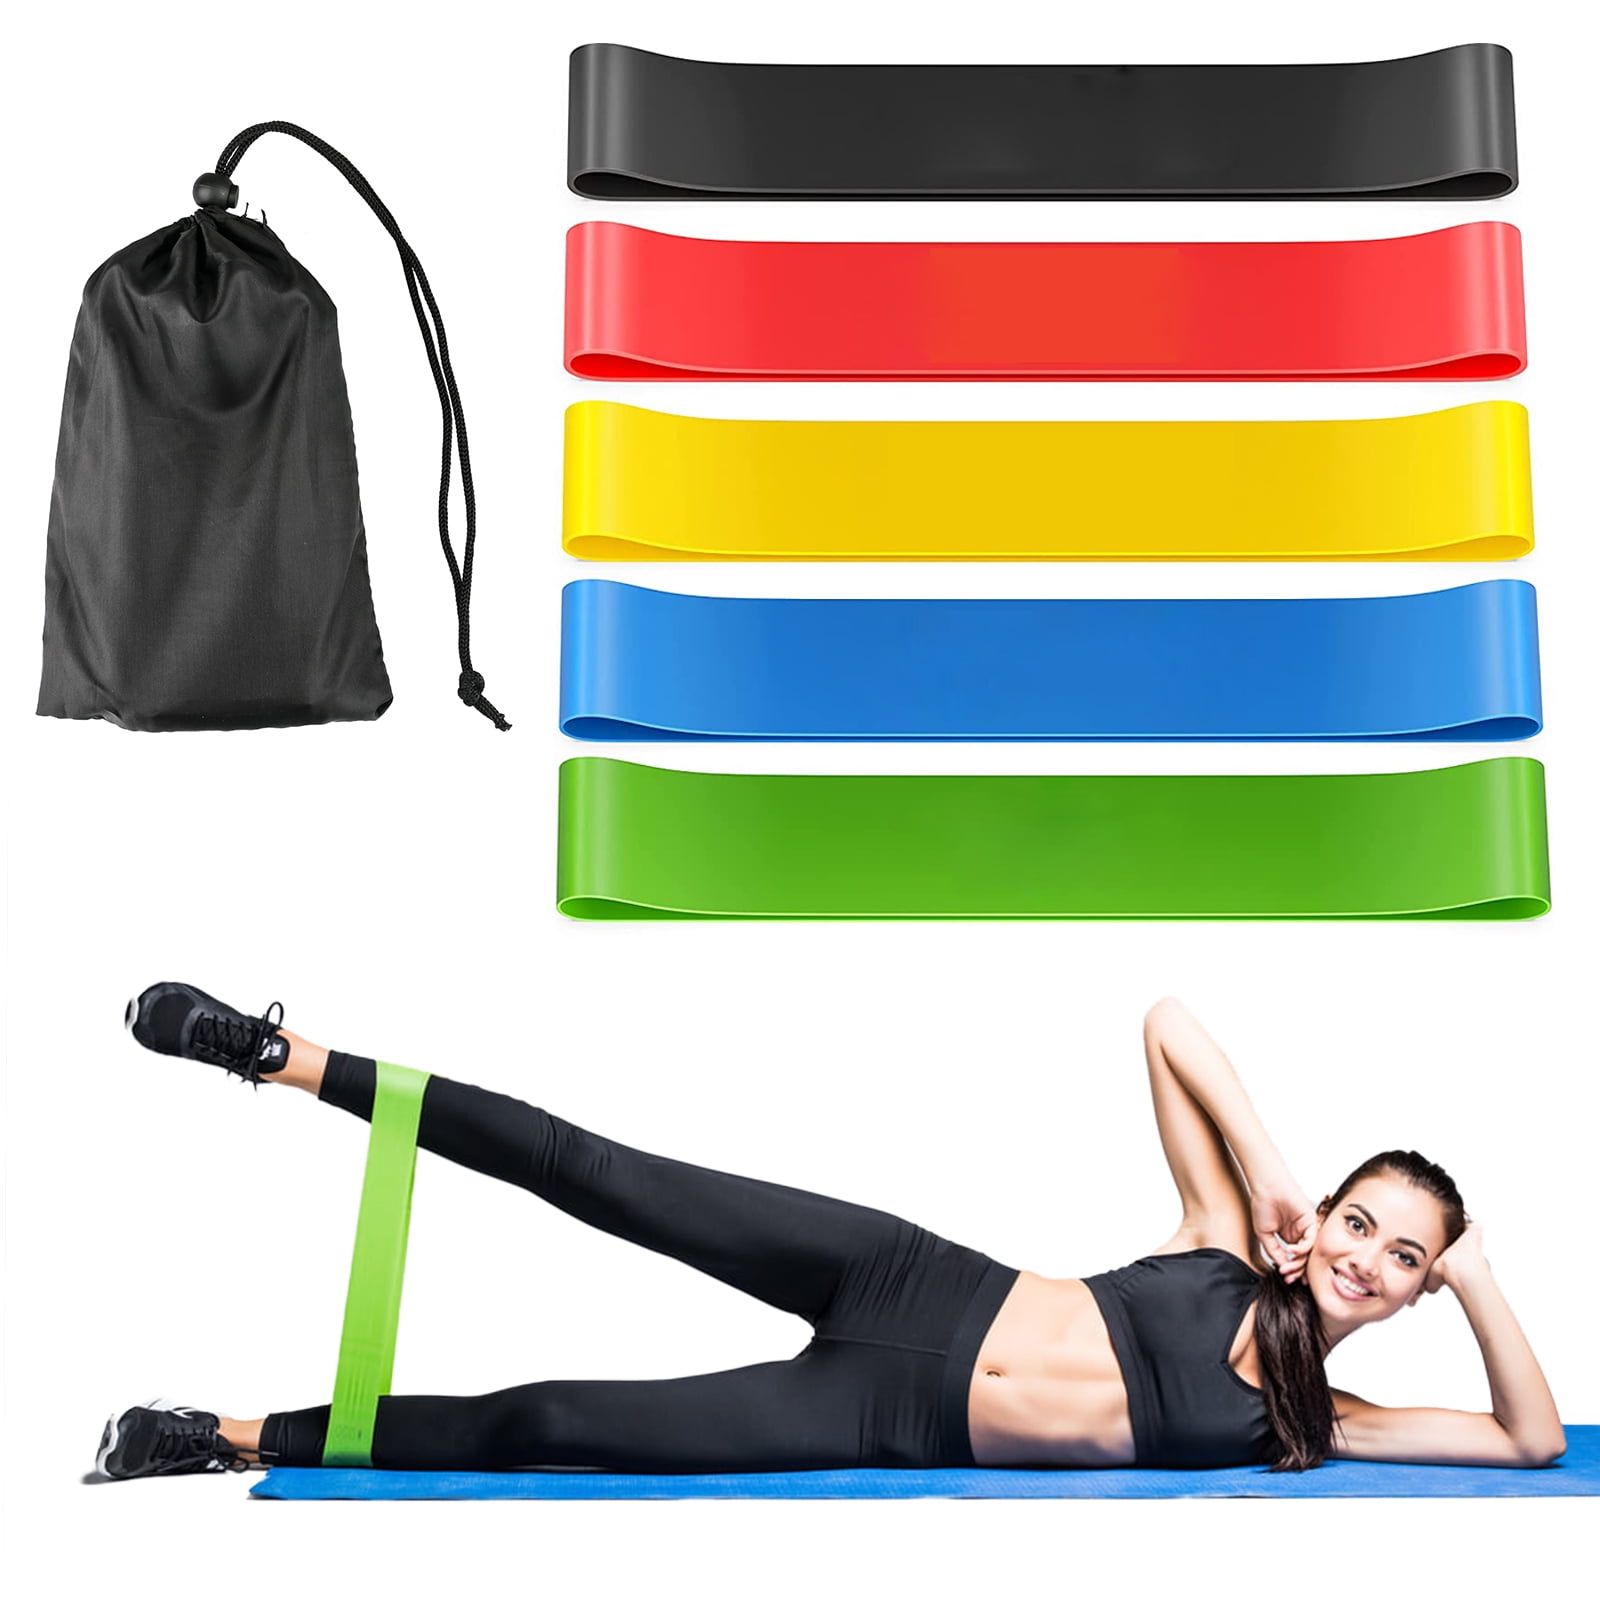 Details about   Exercise Resistance Bands Fitness Yoga Workout Set Loop Band Booty Gym Crossfit 